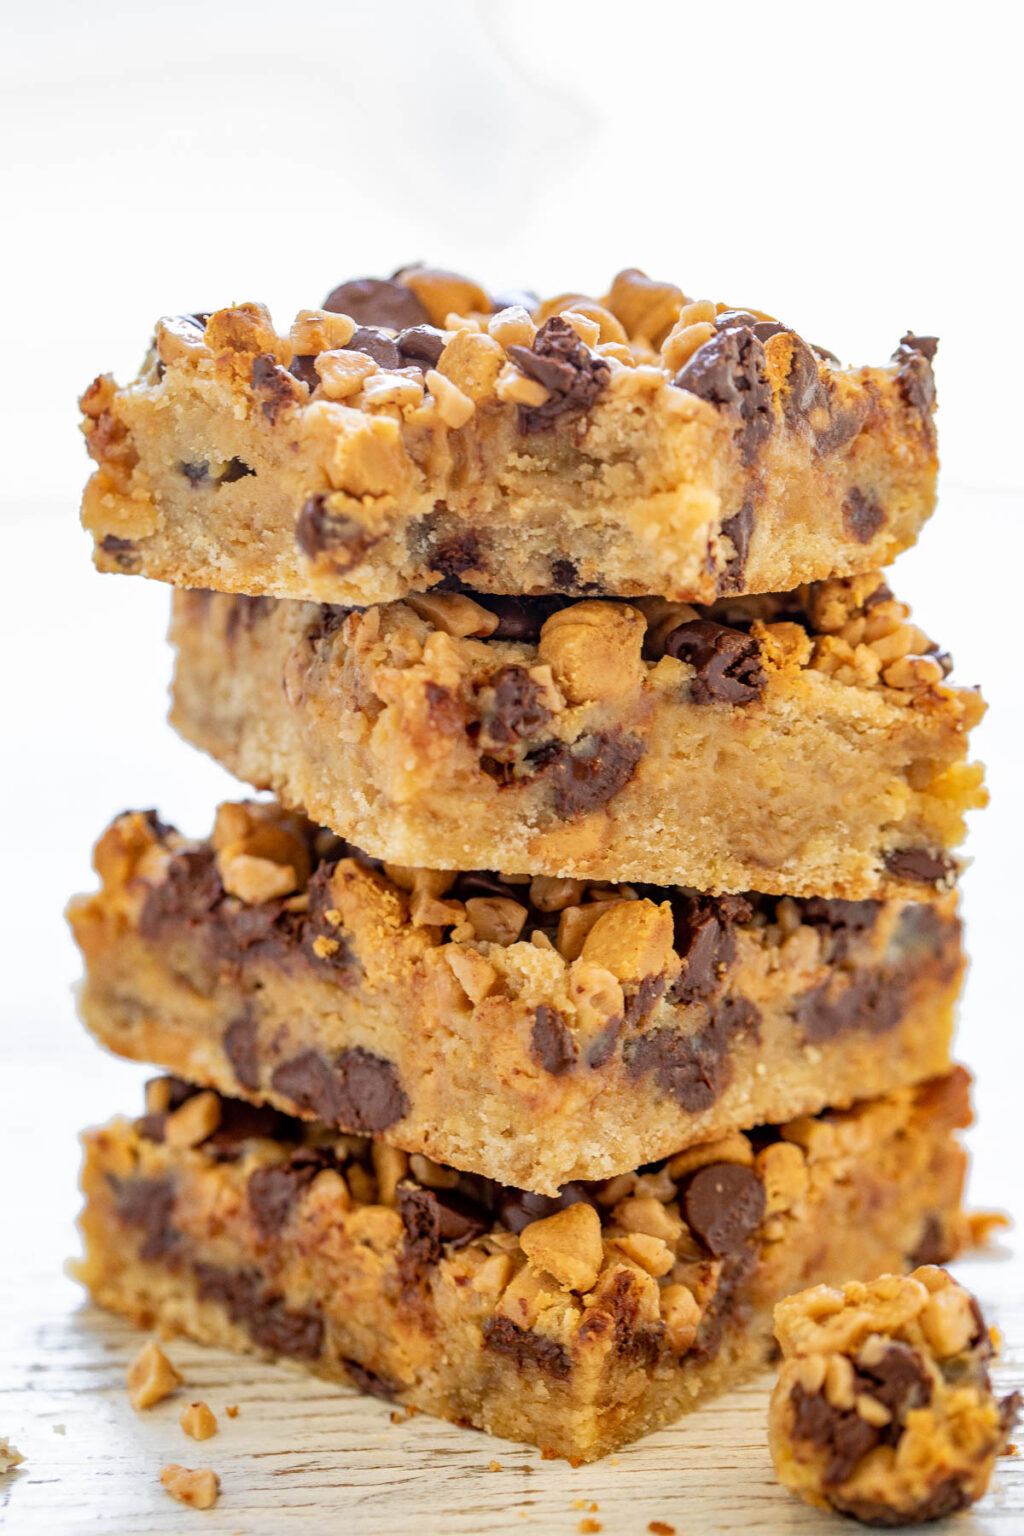 Peanut Butter Chocolate Chip Toffee Bars - Averie Cooks